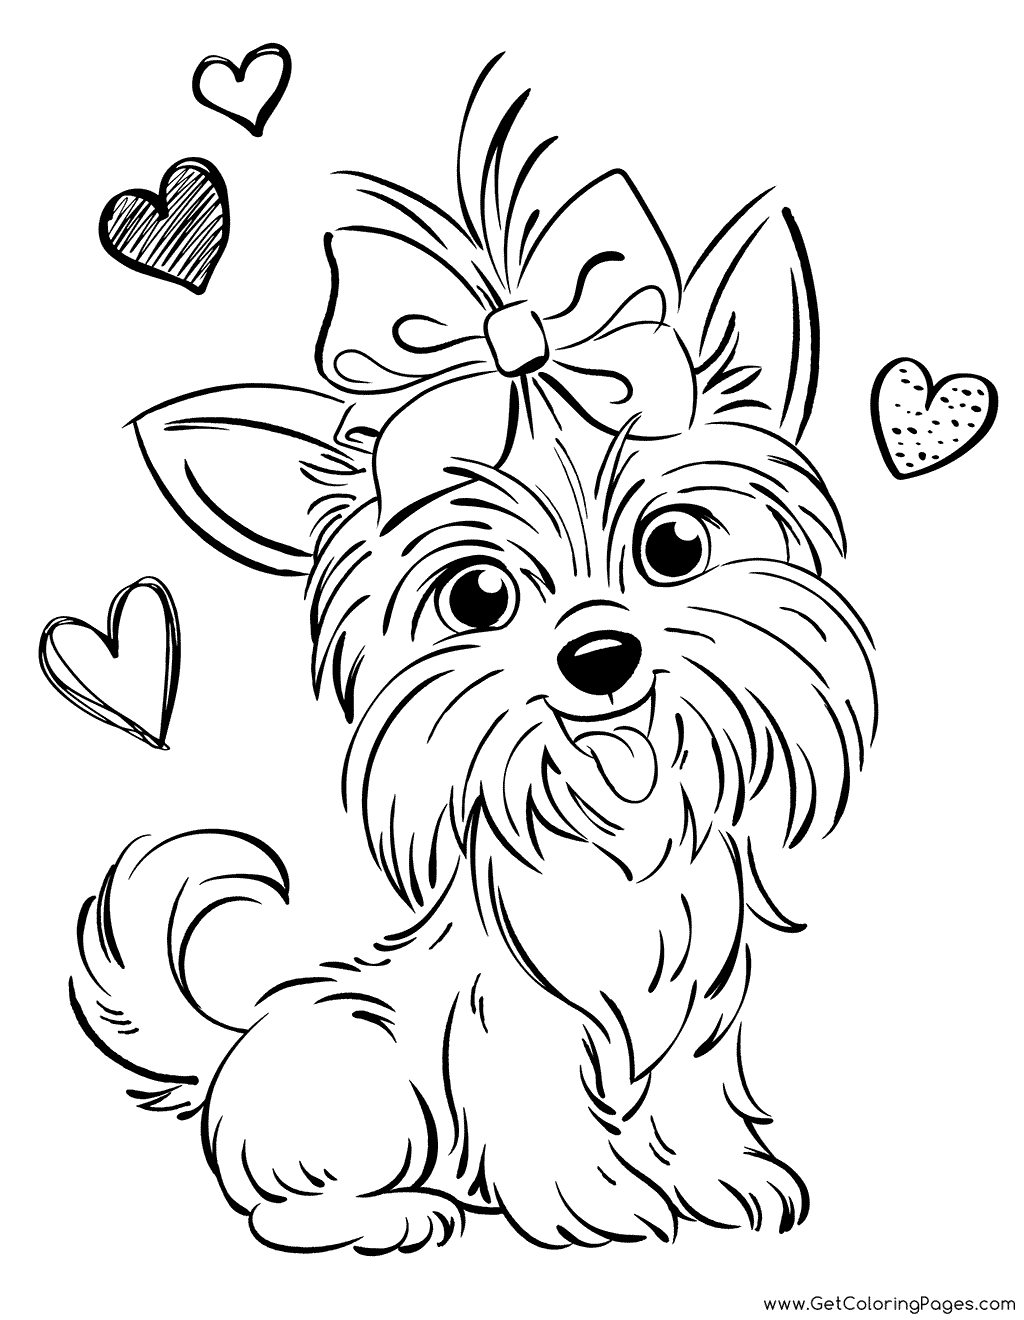 Jojo Siwa's Dog BowBow Coloring Pages - Get Coloring Pages